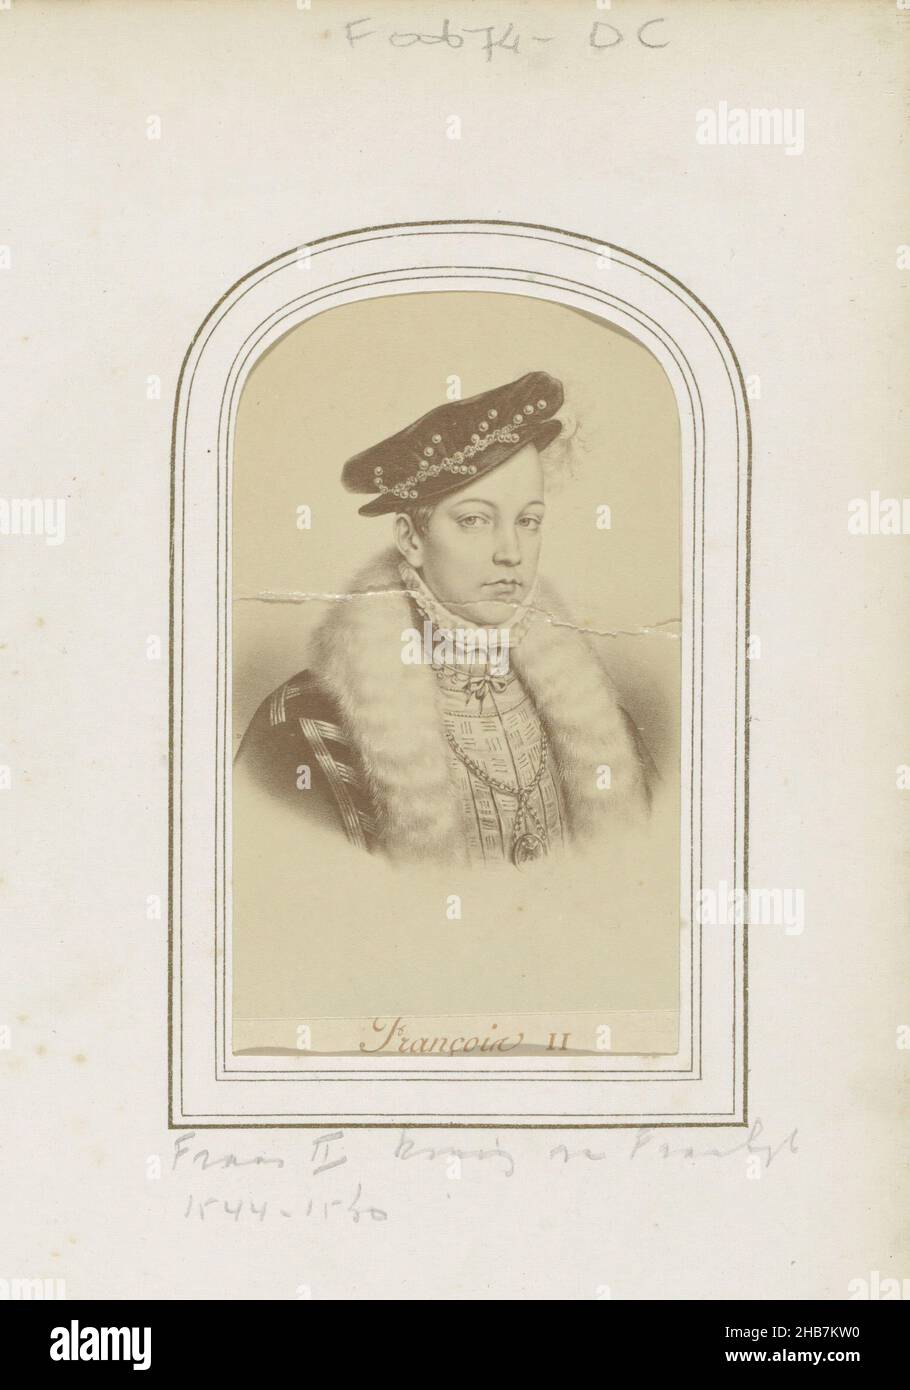 Photoreproduction of (presumably) a print of Francis II, King of France, François II (title on object), Part of Photo Album with 123 cartes-de-visite of members of European royal houses, politicians and well-known persons., Étienne Neurdein (attributed to), anonymous, c. 1863 - c. 1880, cardboard, paper, albumen print, height 88 mm × width 51 mm Stock Photo